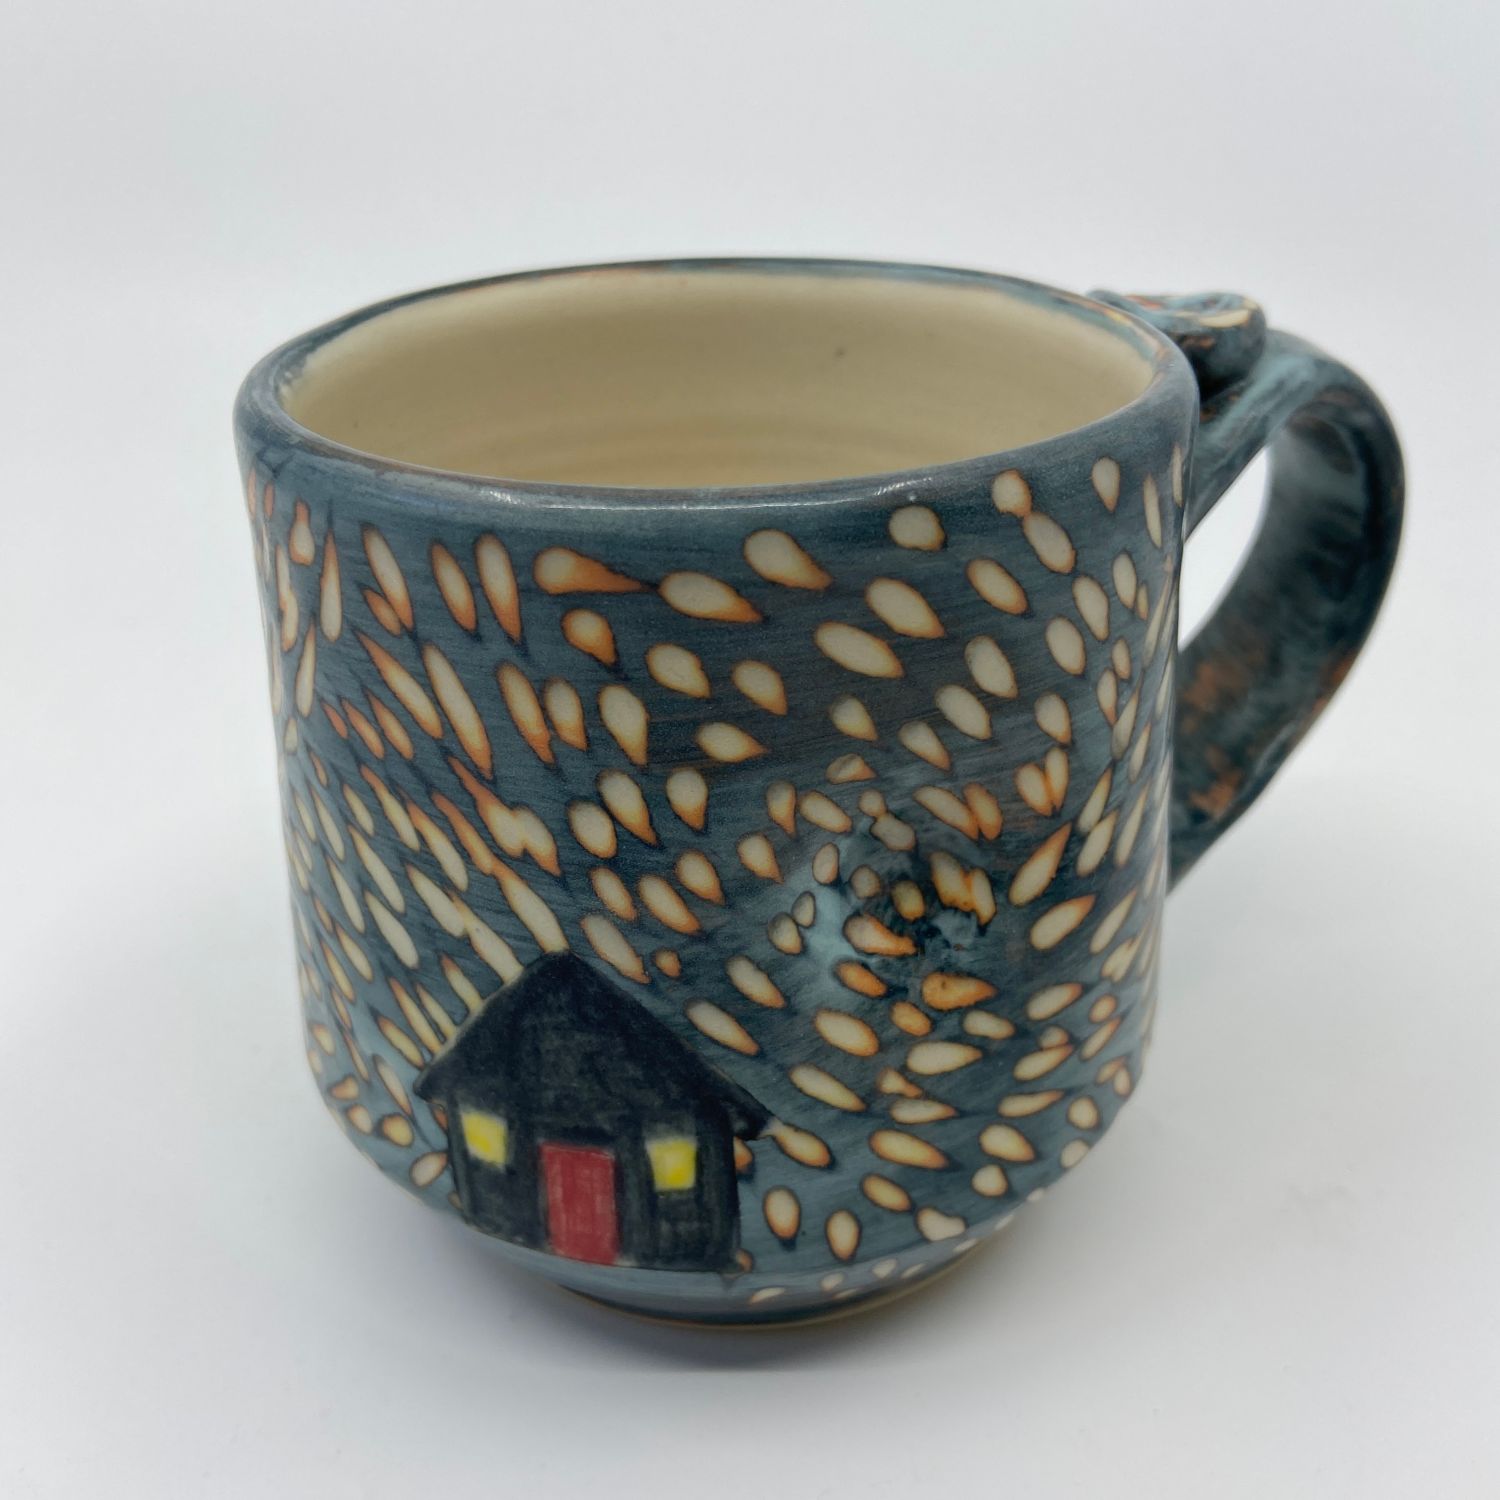 Teresa Dunlop: Carved Belly Button Mug with House Motif Product Image 1 of 3